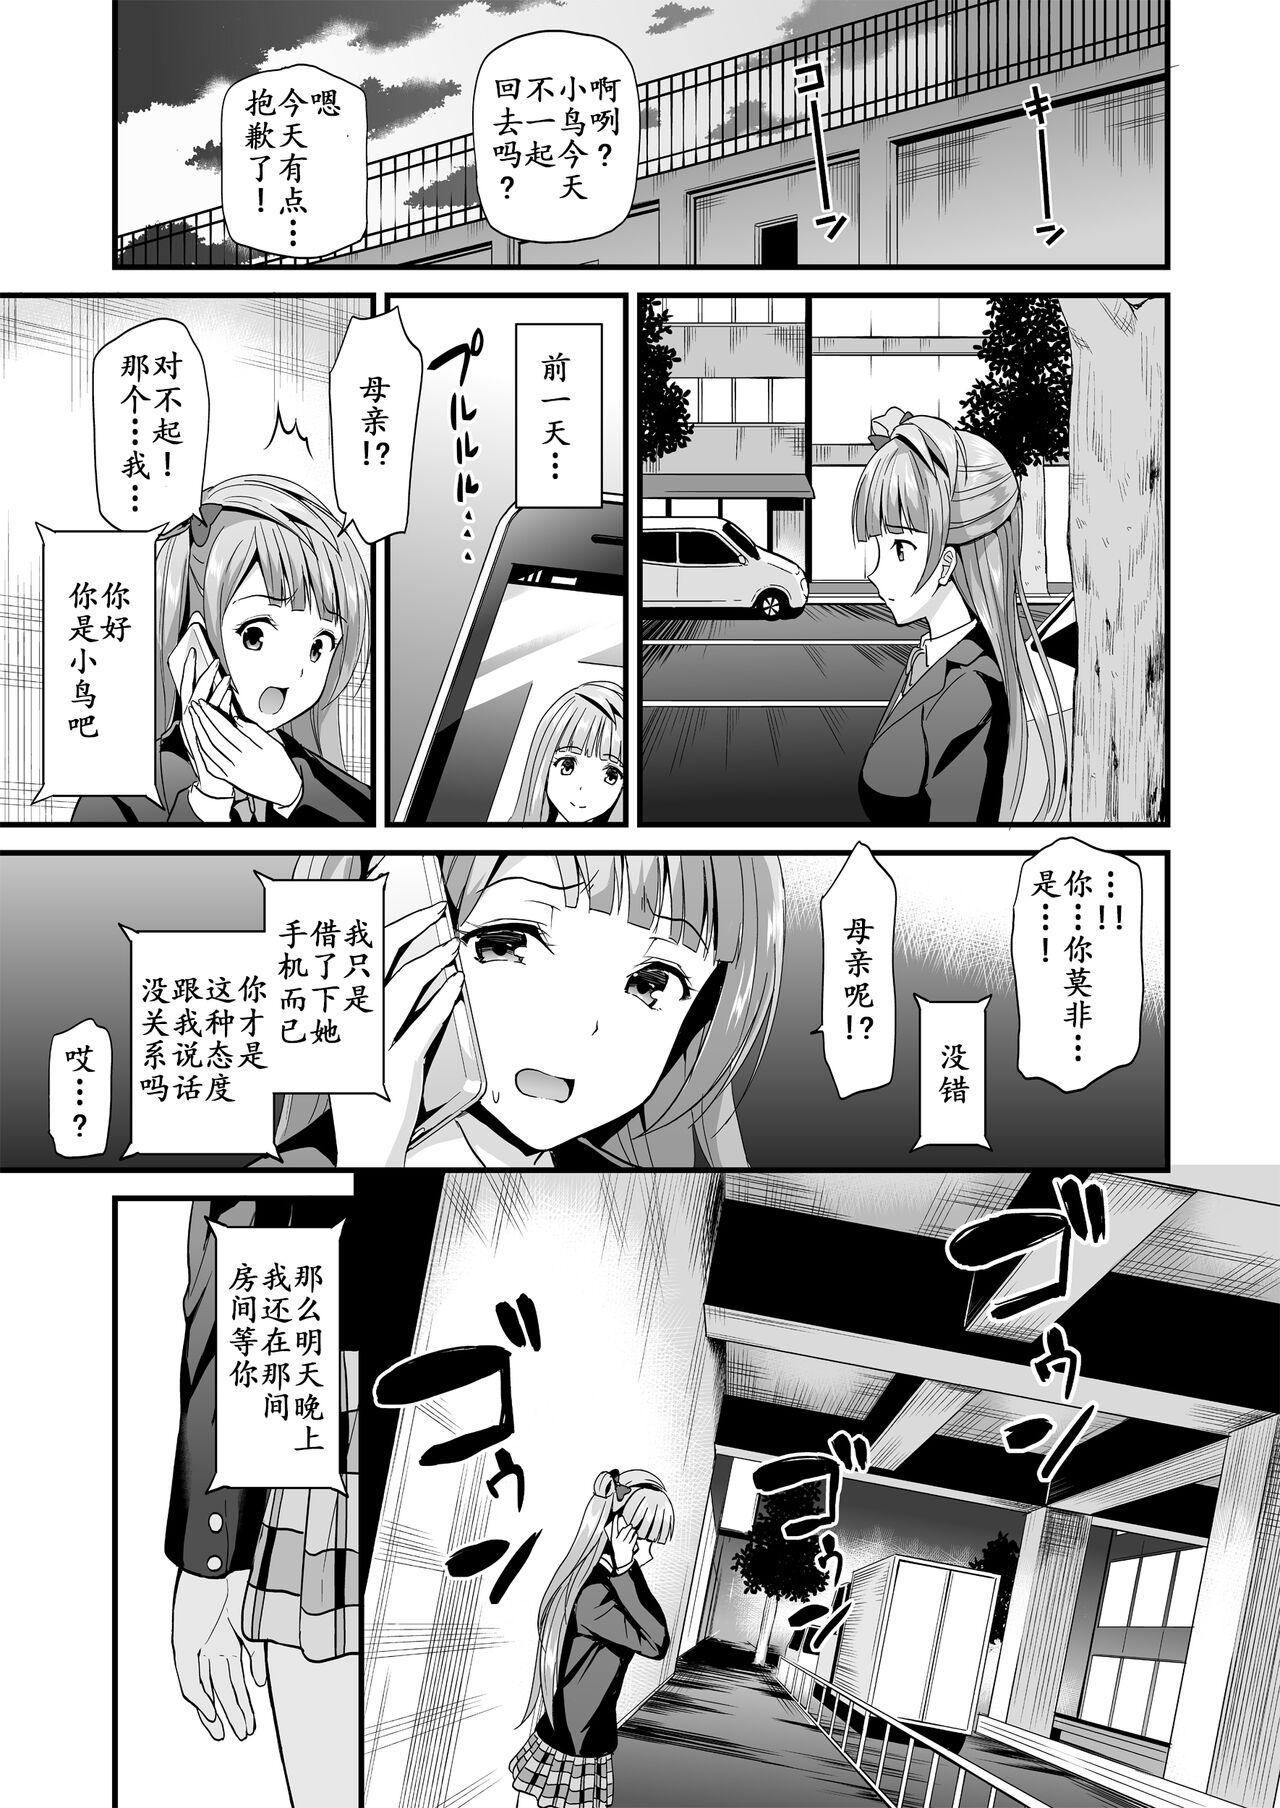 Suck コトリのハナシ 総集編 - Love live Shaved Pussy - Page 11